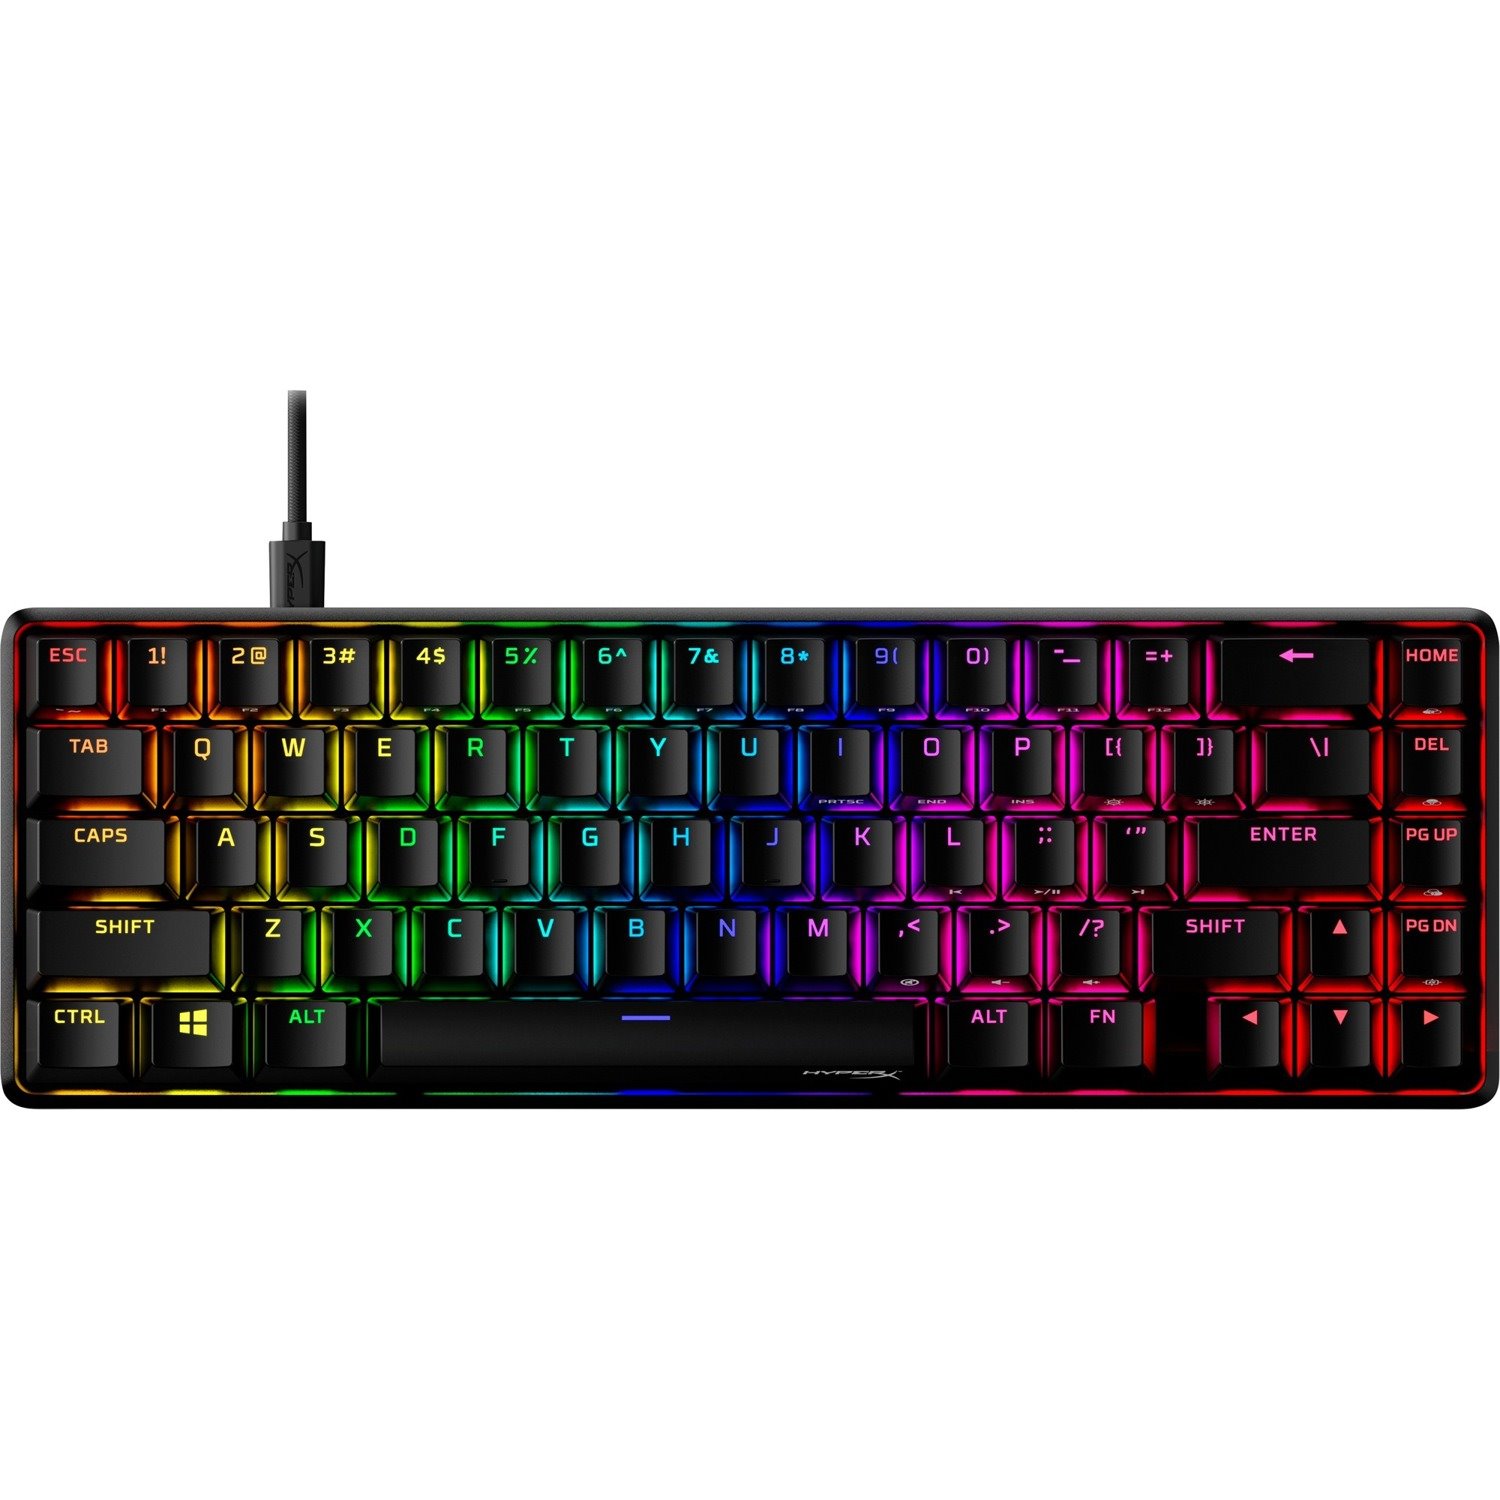 HyperX Alloy Origins 65 Gaming Keyboard - Cable Connectivity - USB Type C Interface - RGB LED - English (US) - Black